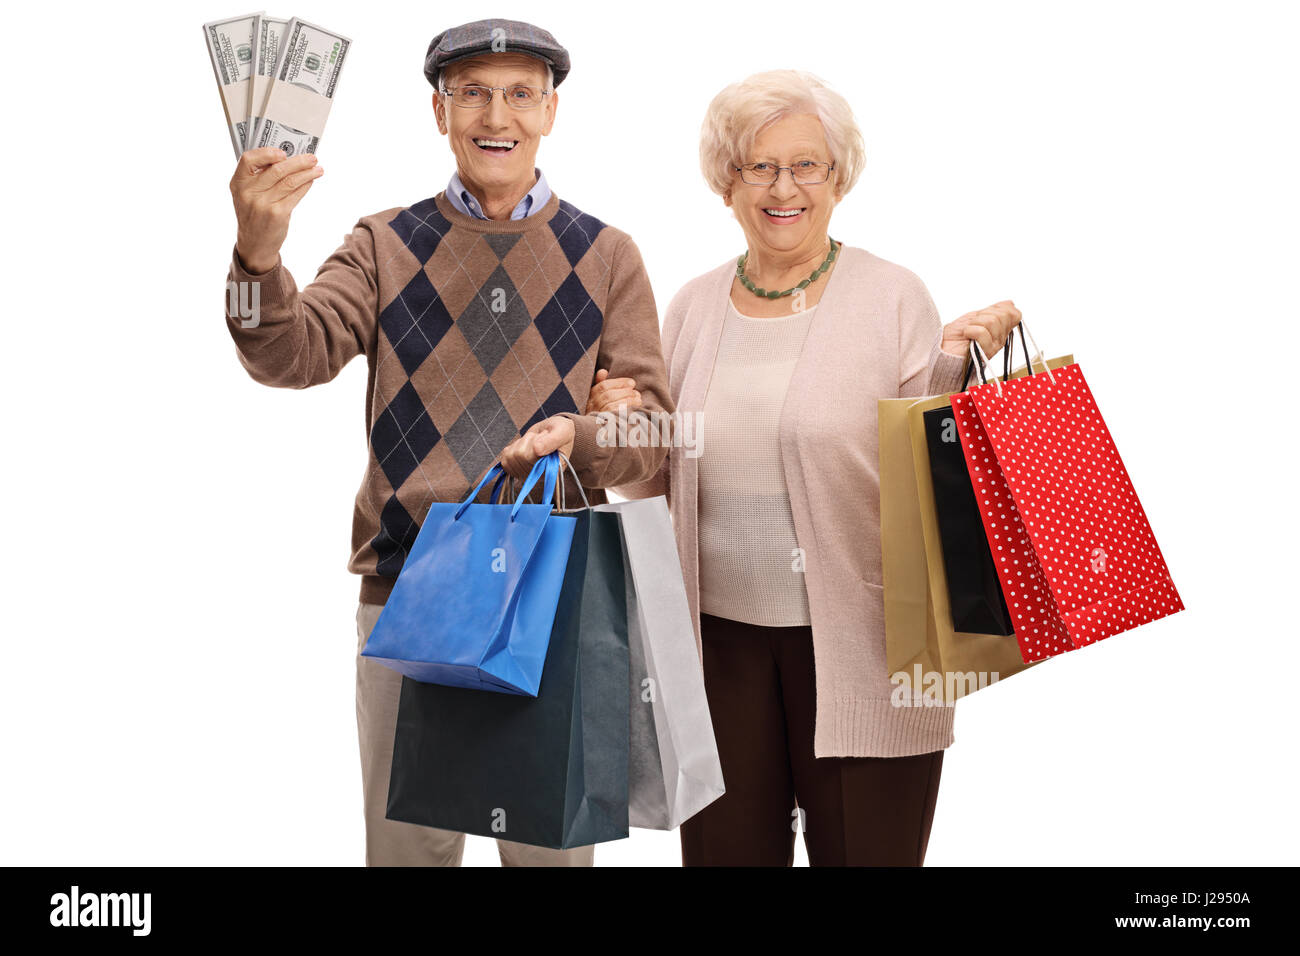 Cheerful seniors with bundles of money and shopping bags isolated on white background Stock Photo